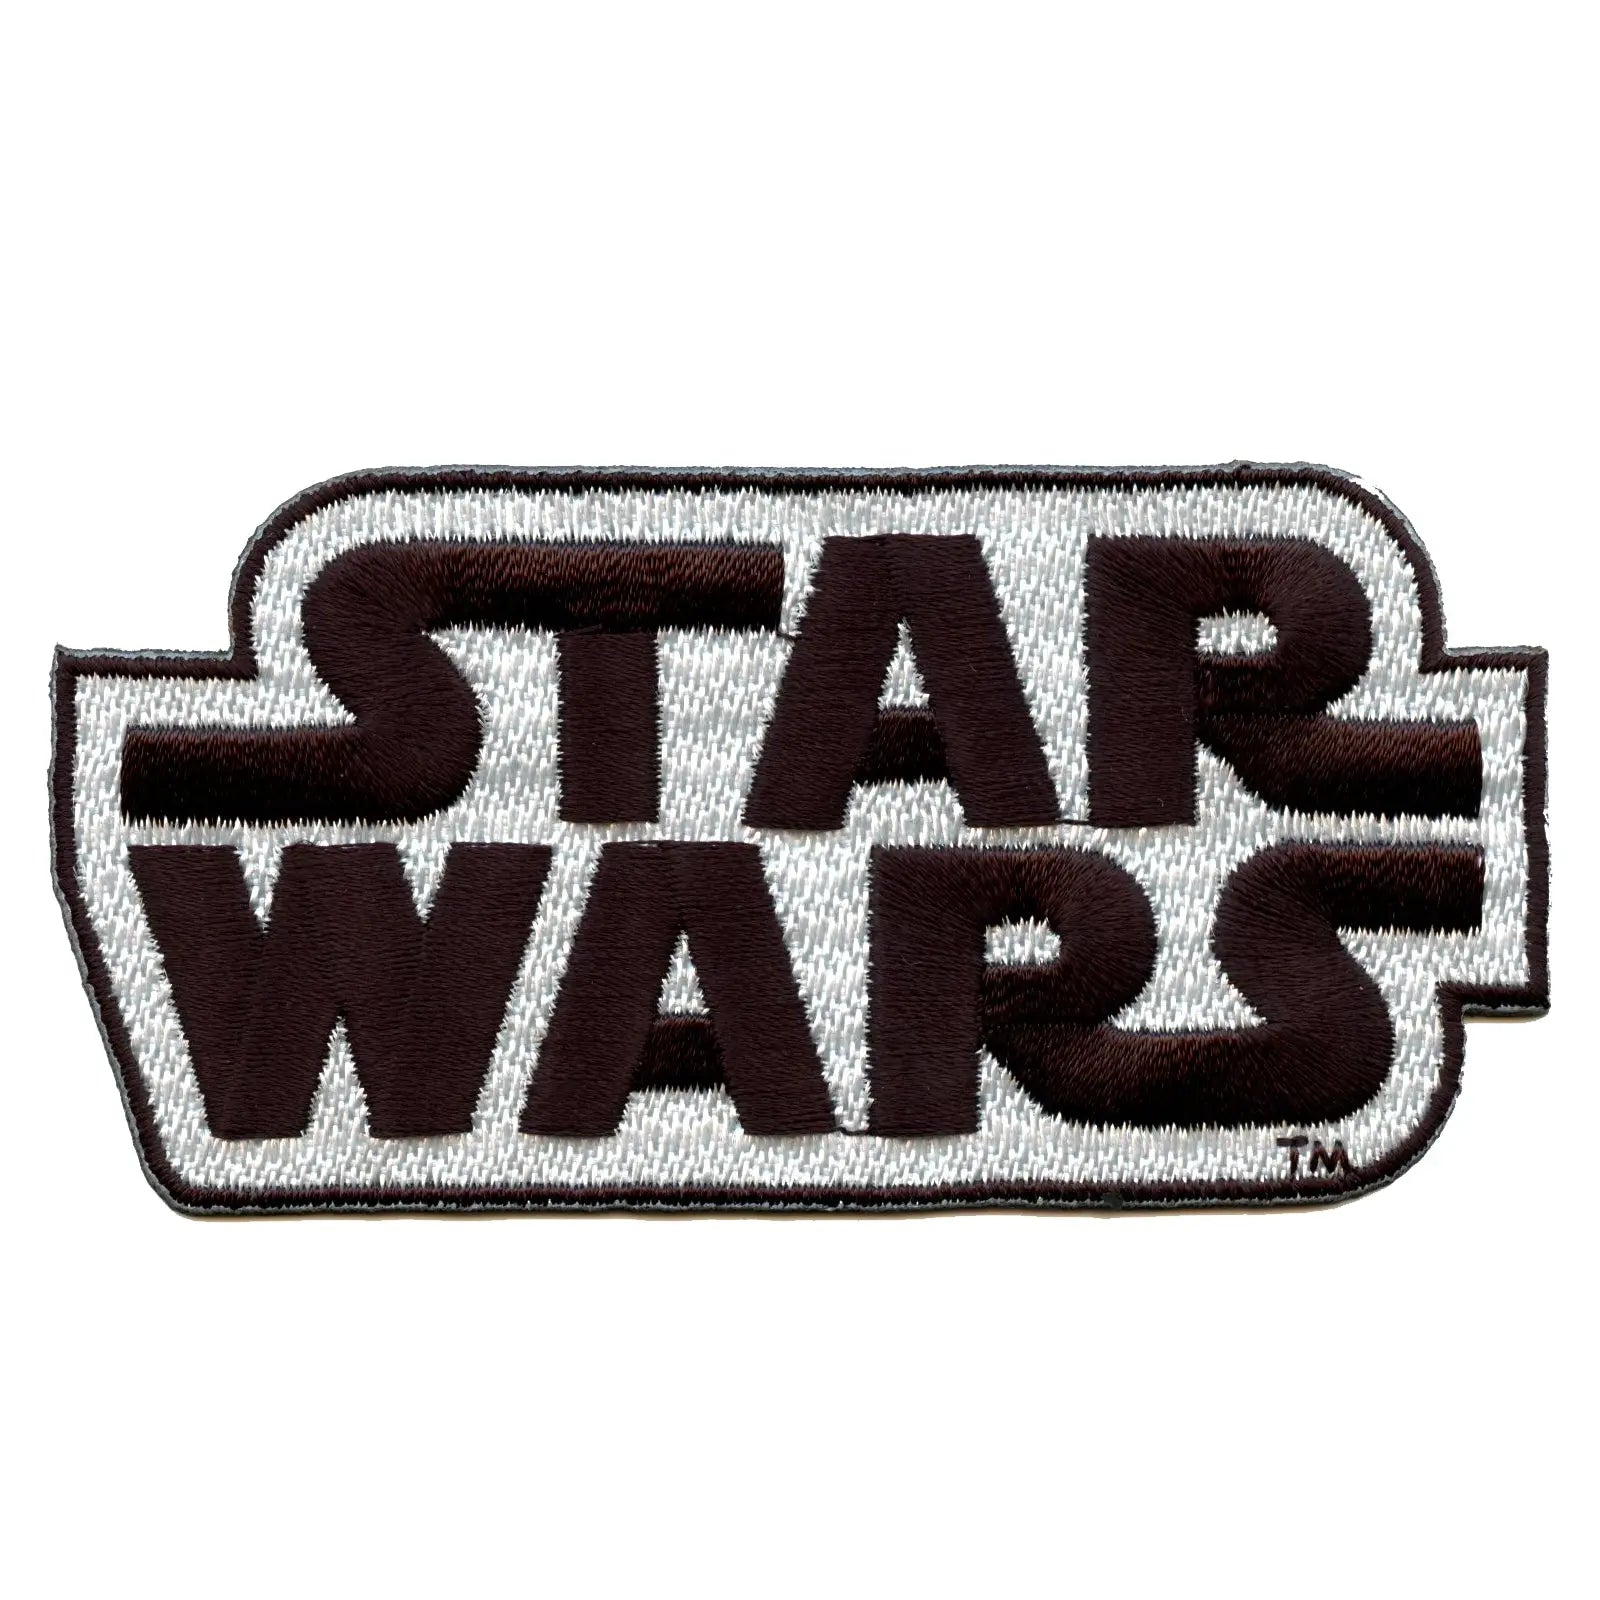 Official Star Wars Logo With Grey Background Embroidered Iron On Patch 